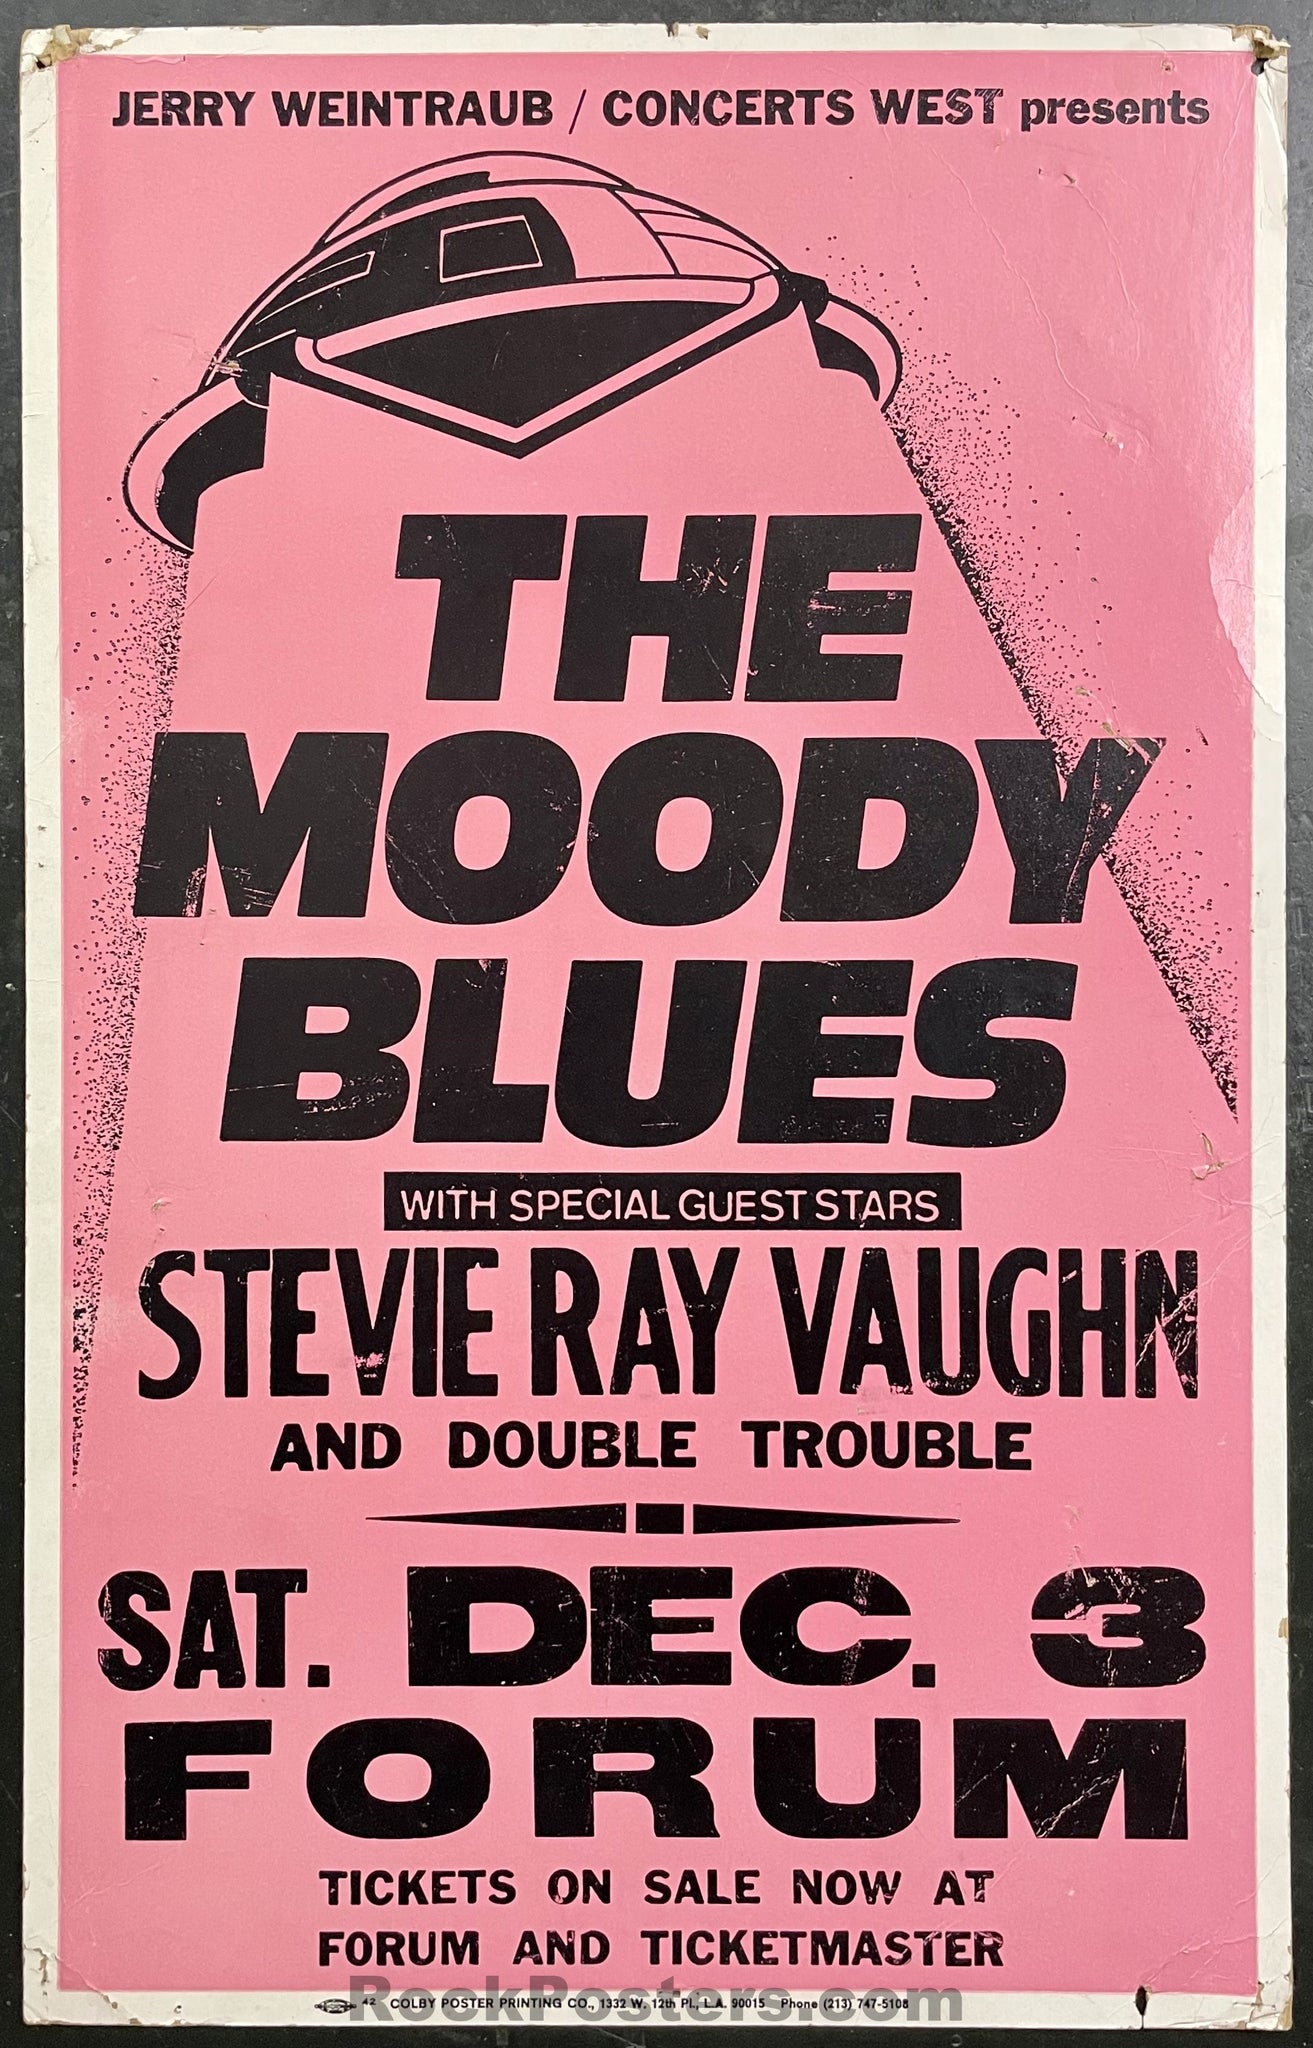 AUCTION - Stevie Ray Vaughan -  Moody Blues - 1983   Board Poster - LA Forum - Very Good